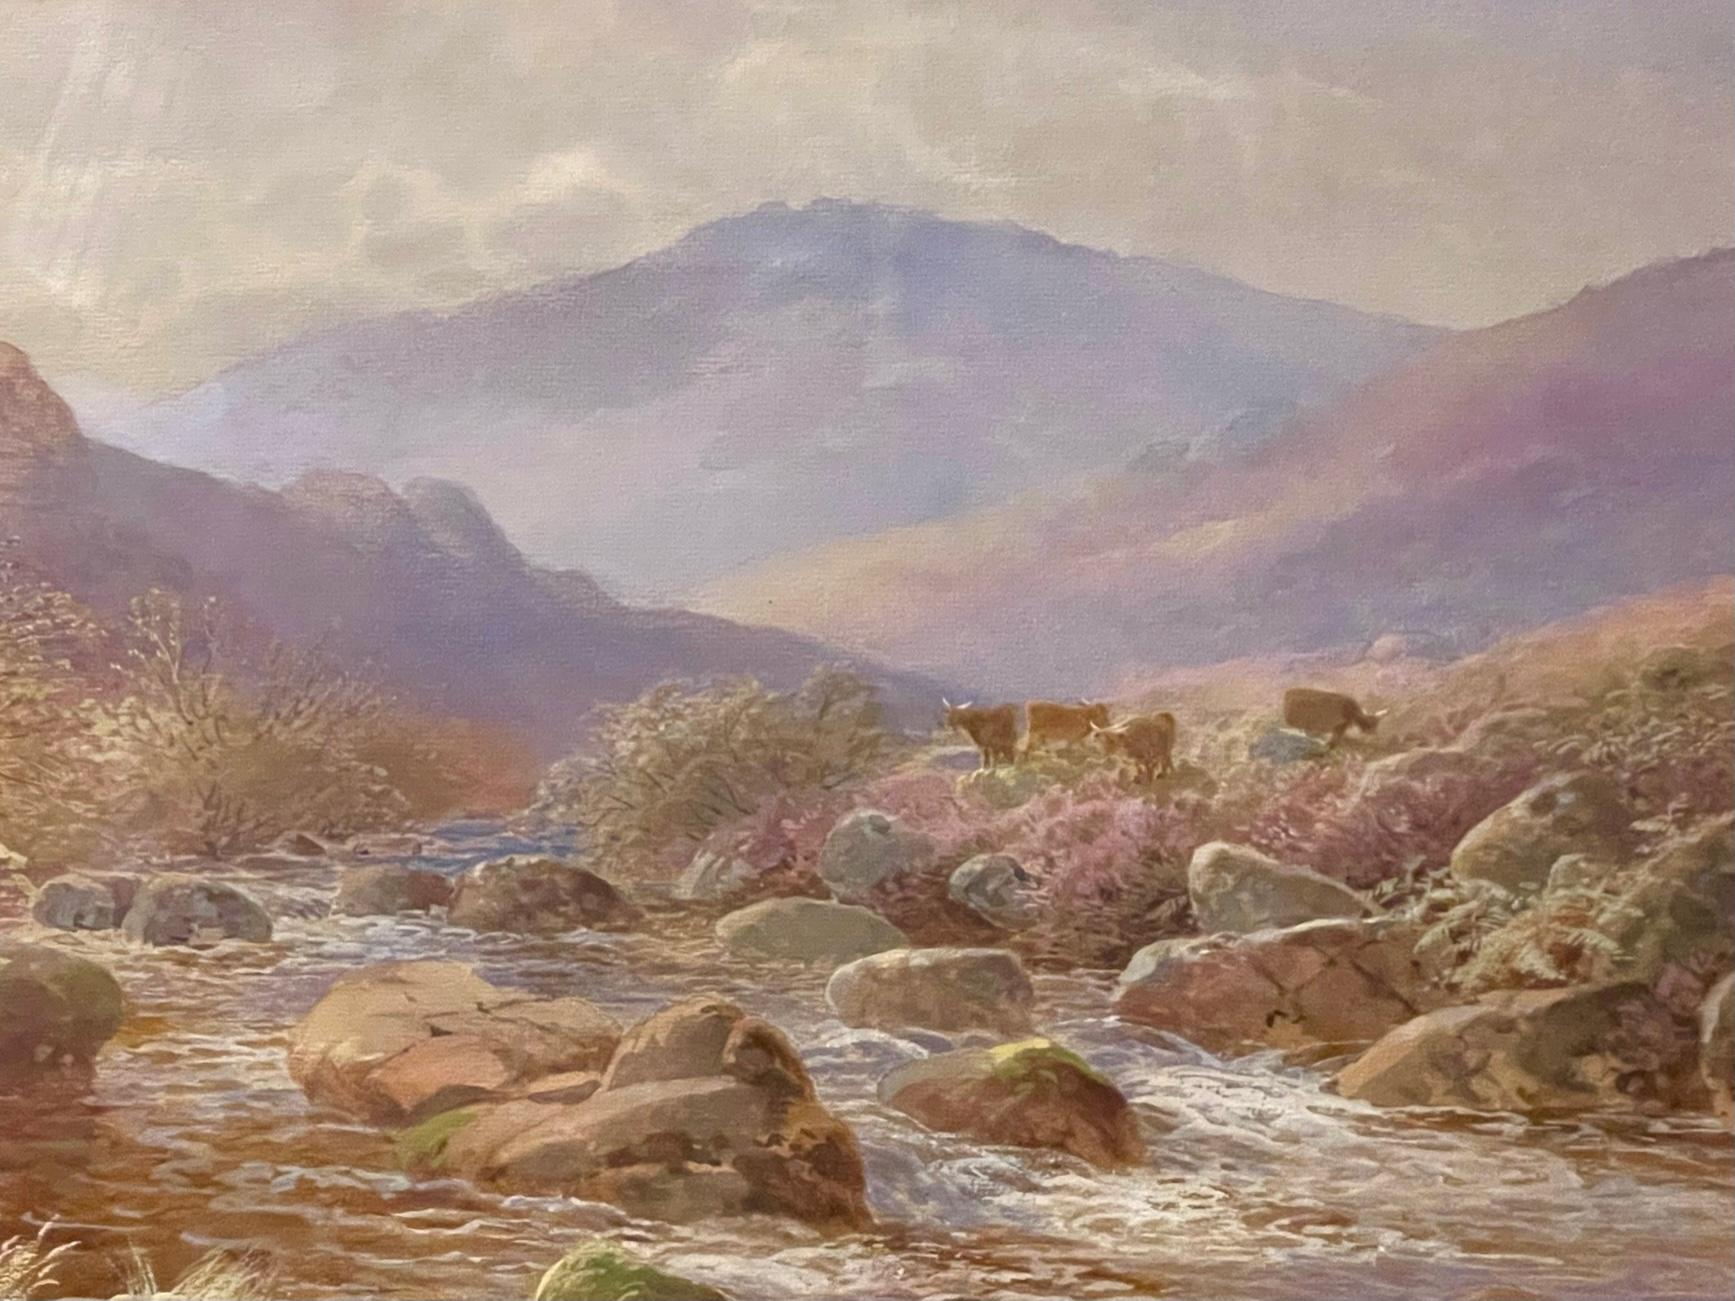 Scottish Highland mountains, river rapids and heather on the hill with cows, this 19th century impressionist watercolor is bright and fresh.  Signed by the artist, John Barrett (1822-1898), on the lower left side.  This painting is aptly titled